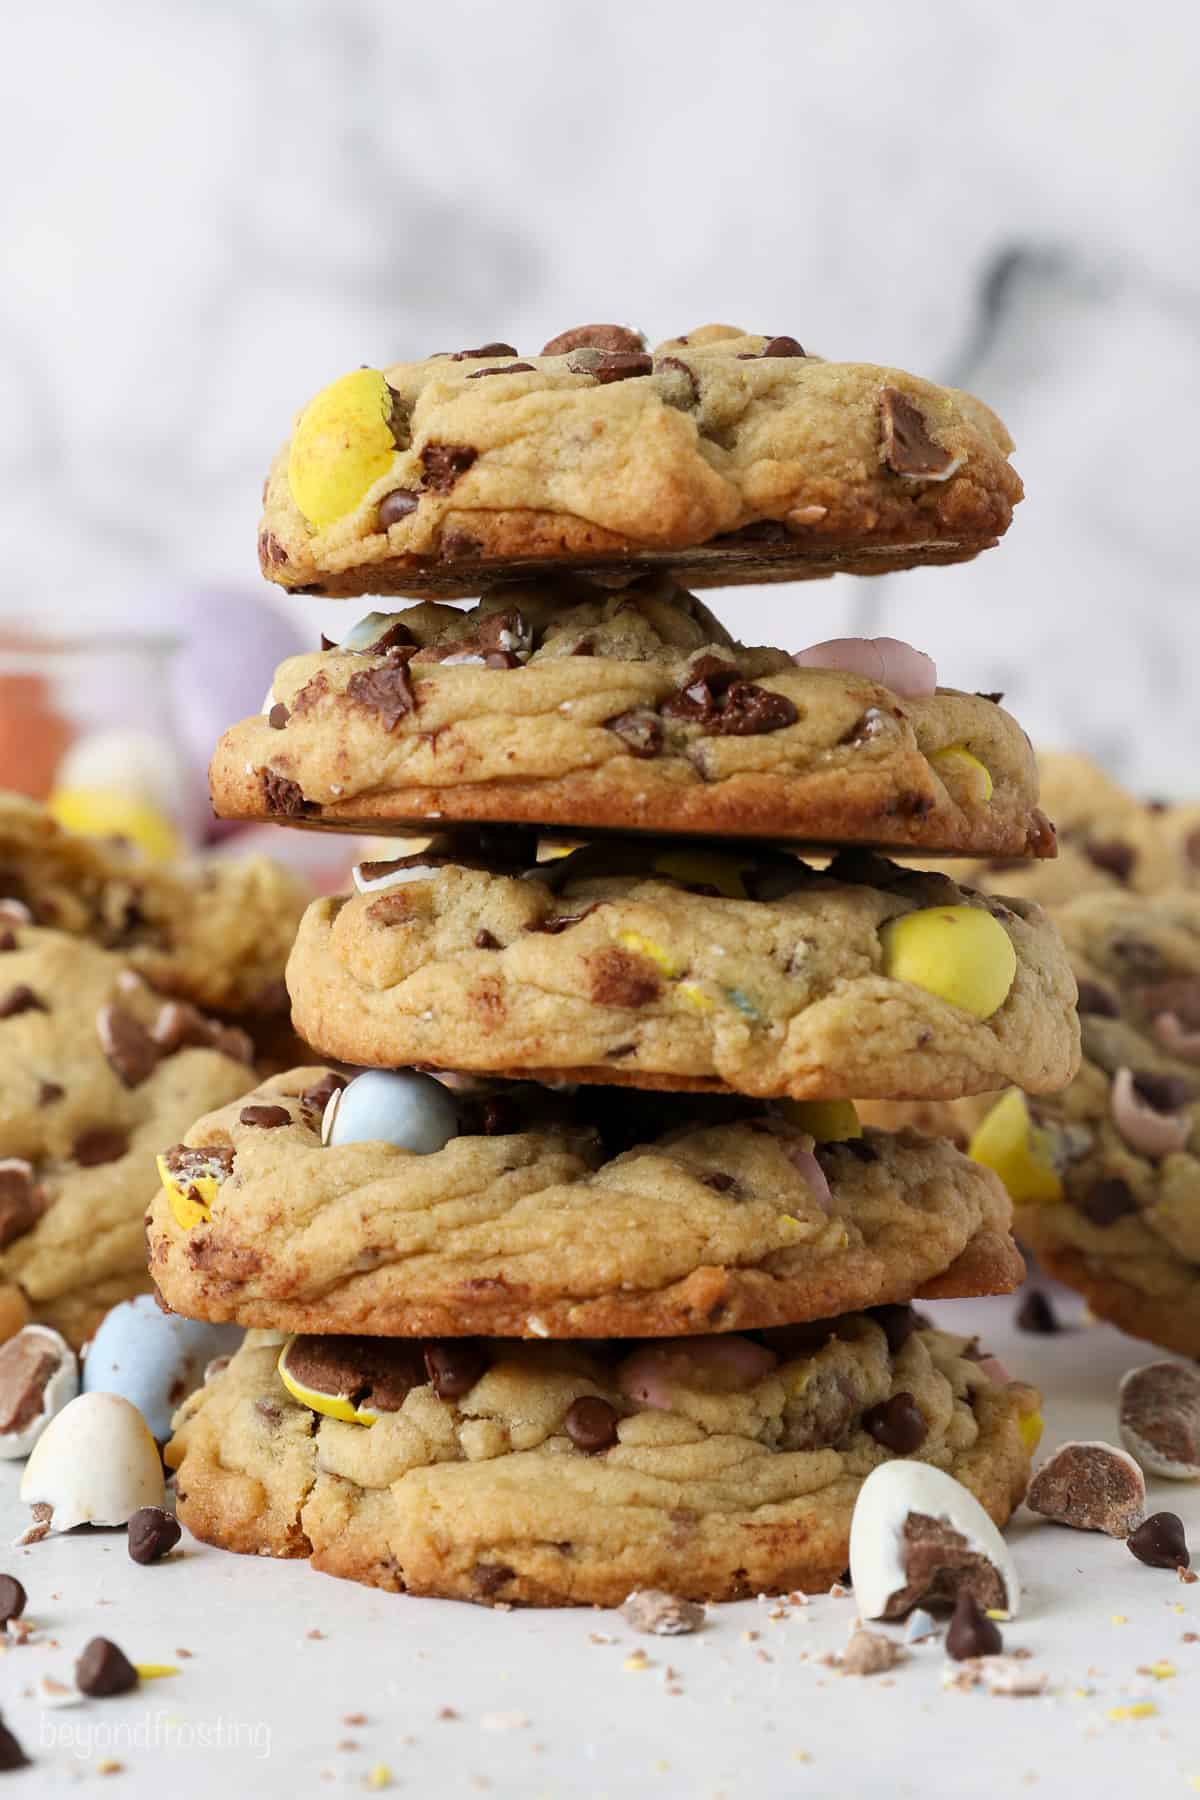 A stack of 5 thick chocolate chip cookies loaded with Cadbury Mini Eggs